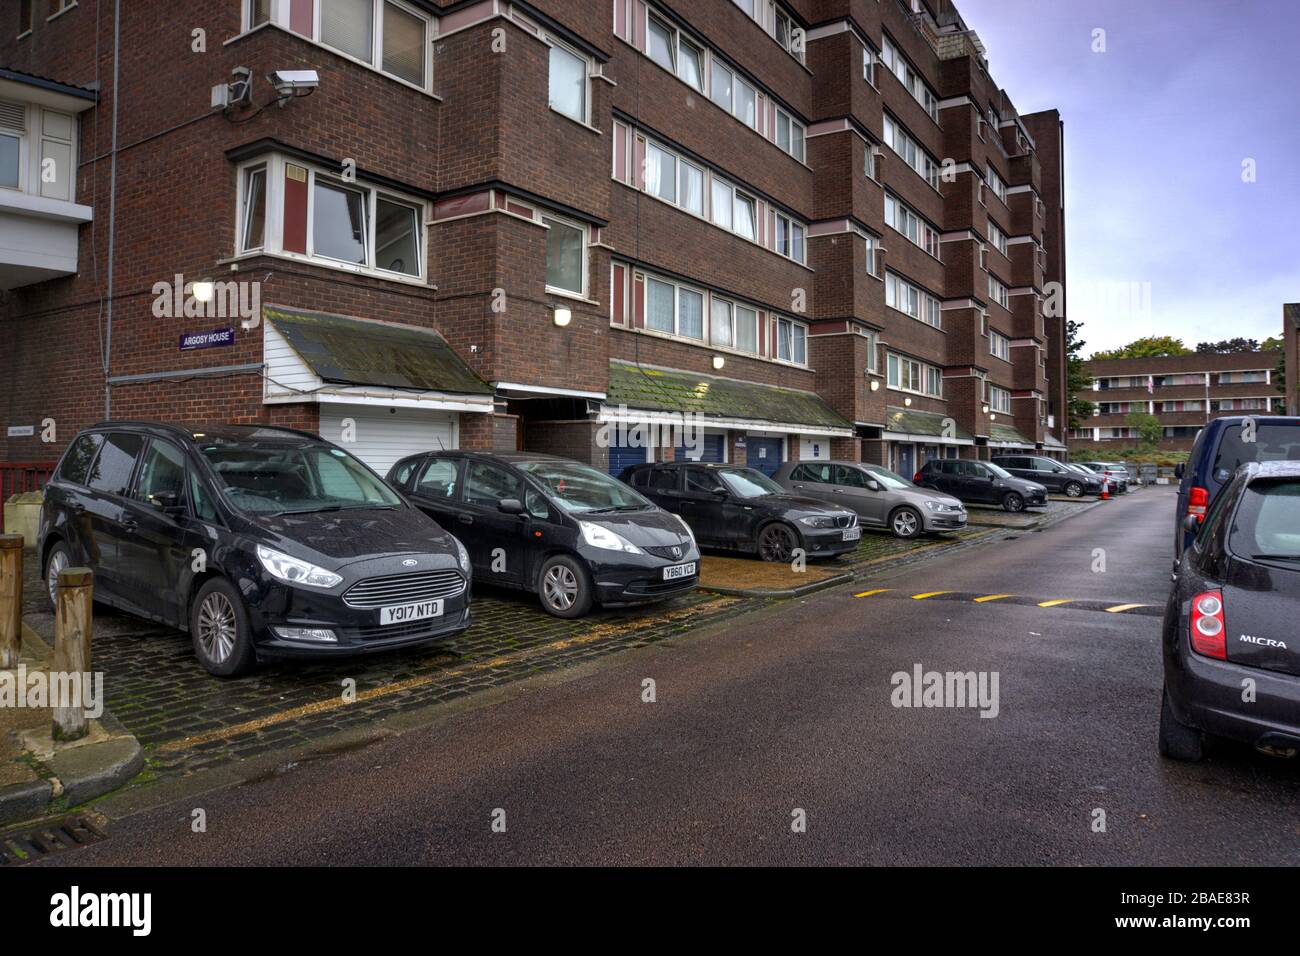 Deptford, London, United Kingdom - October 12, 2019: Argosy House part of the Pepys social housing estate from rear showing parked cars. Stock Photo